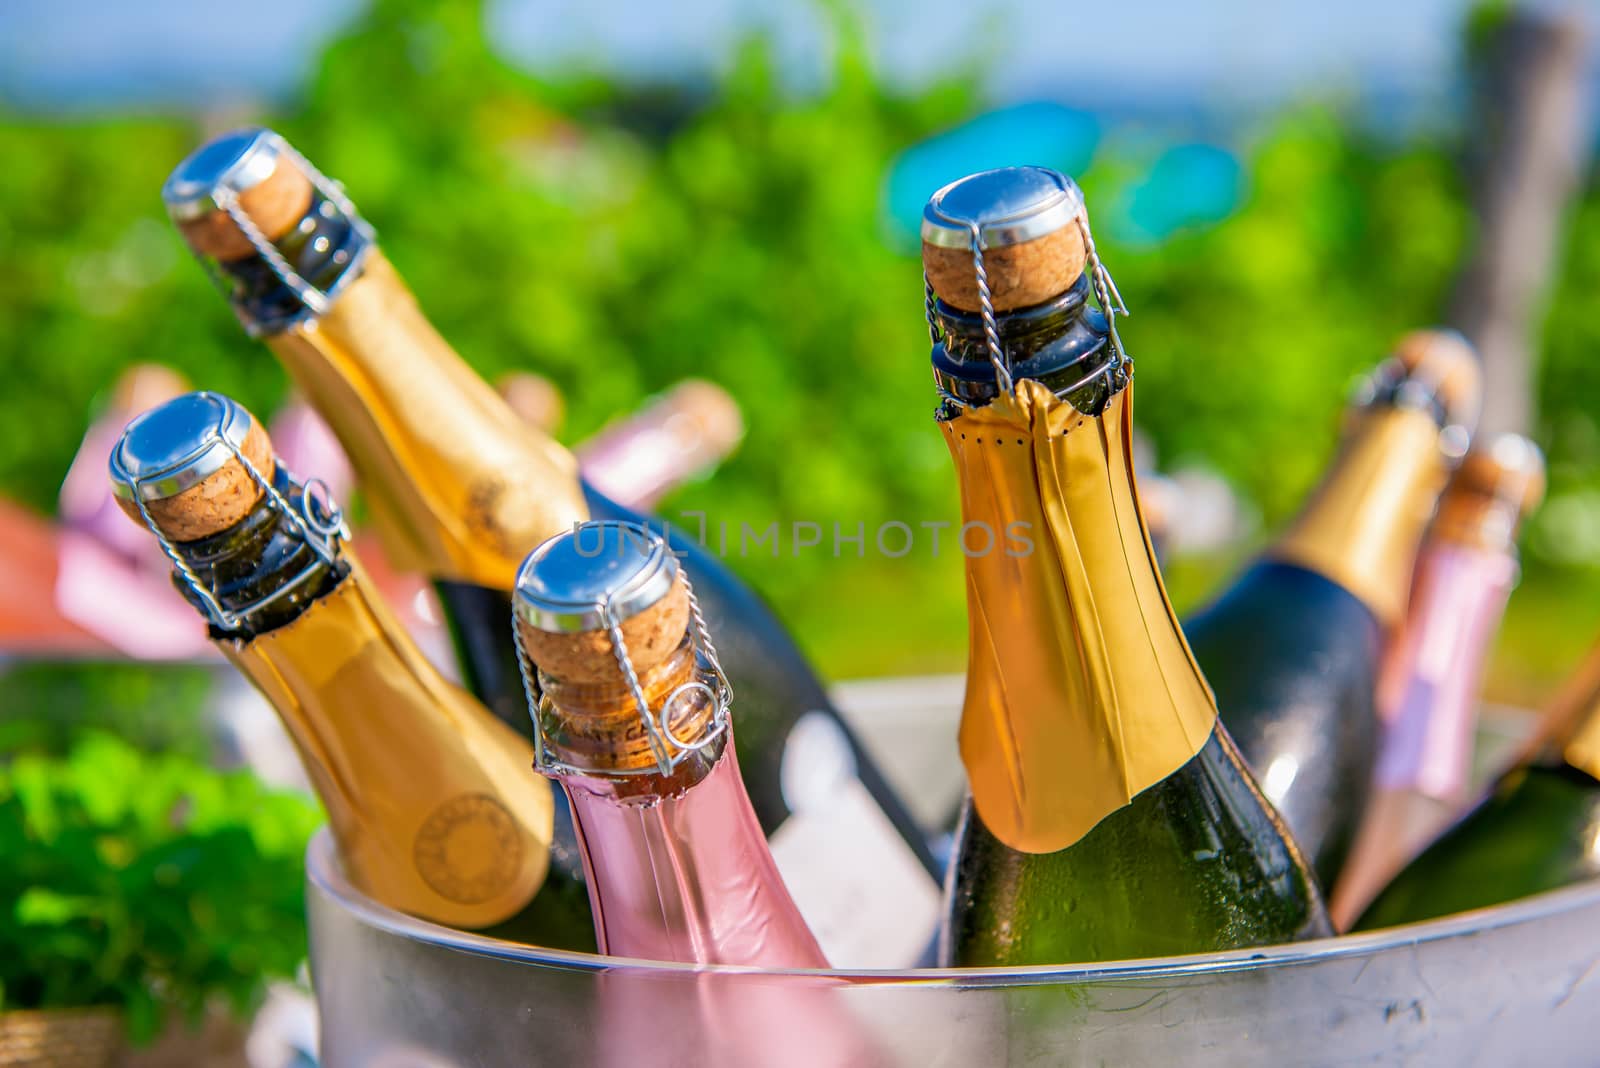 Bottles of champagne, sparkling wine in cooler at wedding reception outdoors, wedding and summer party concept